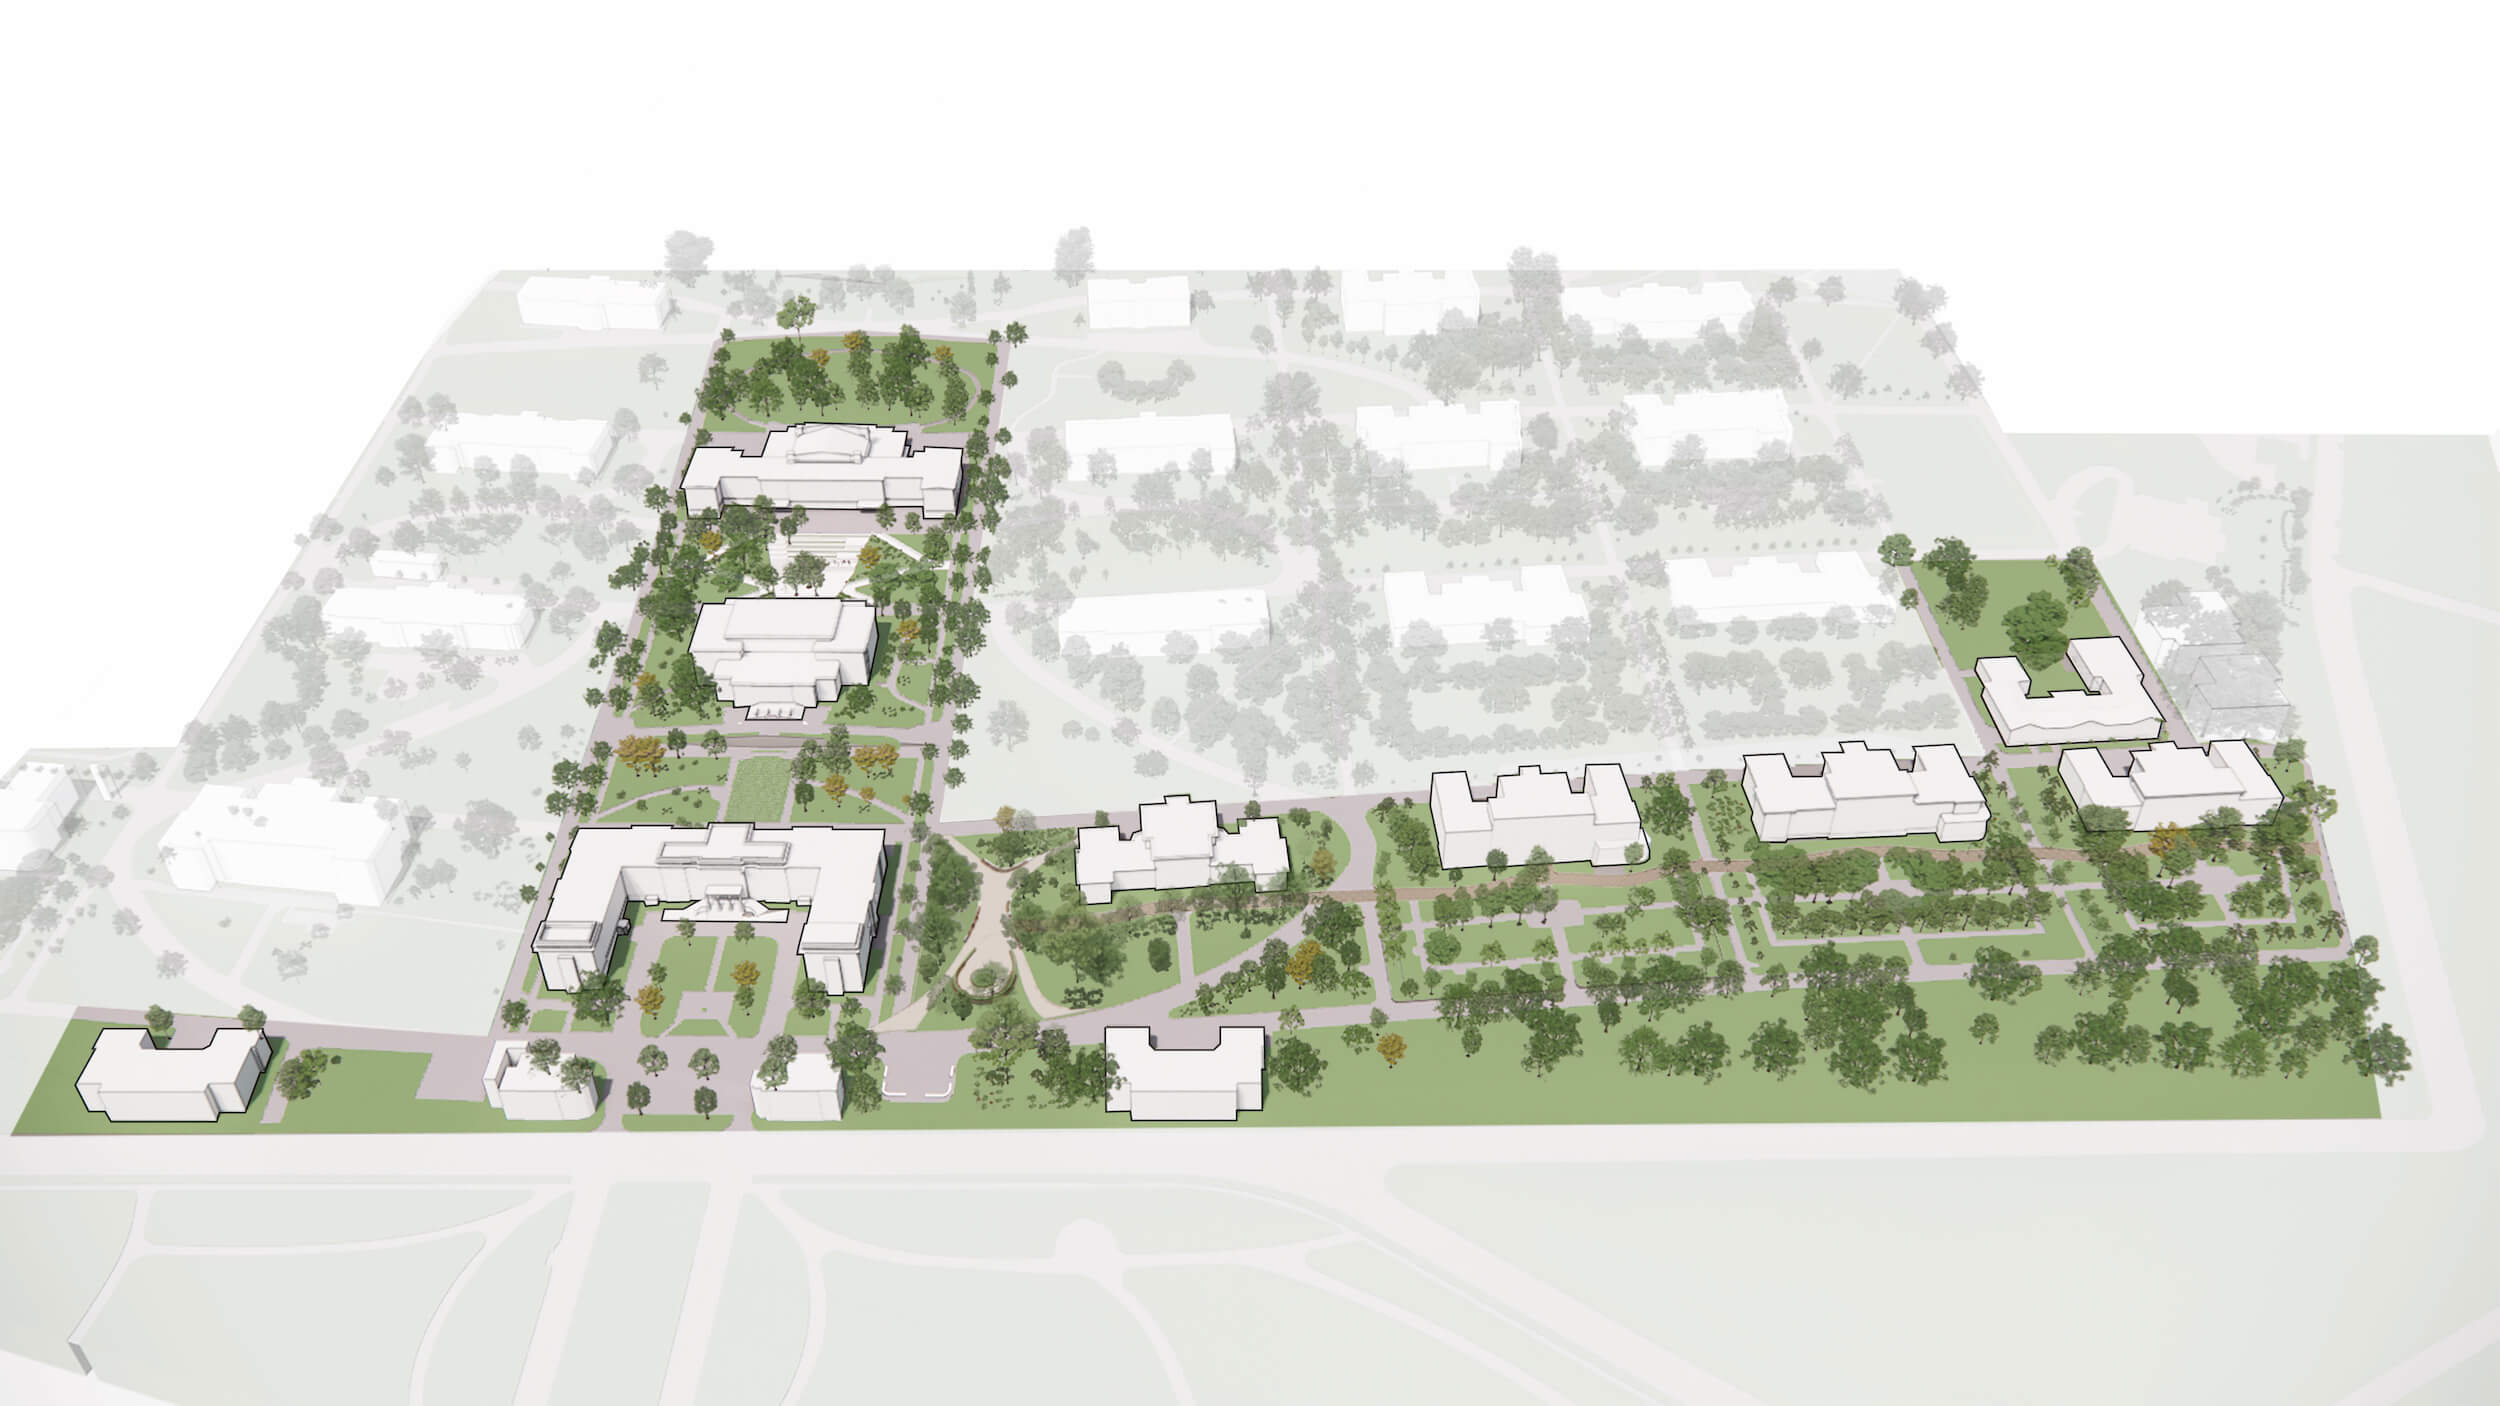 site plan of hospital turned college campus